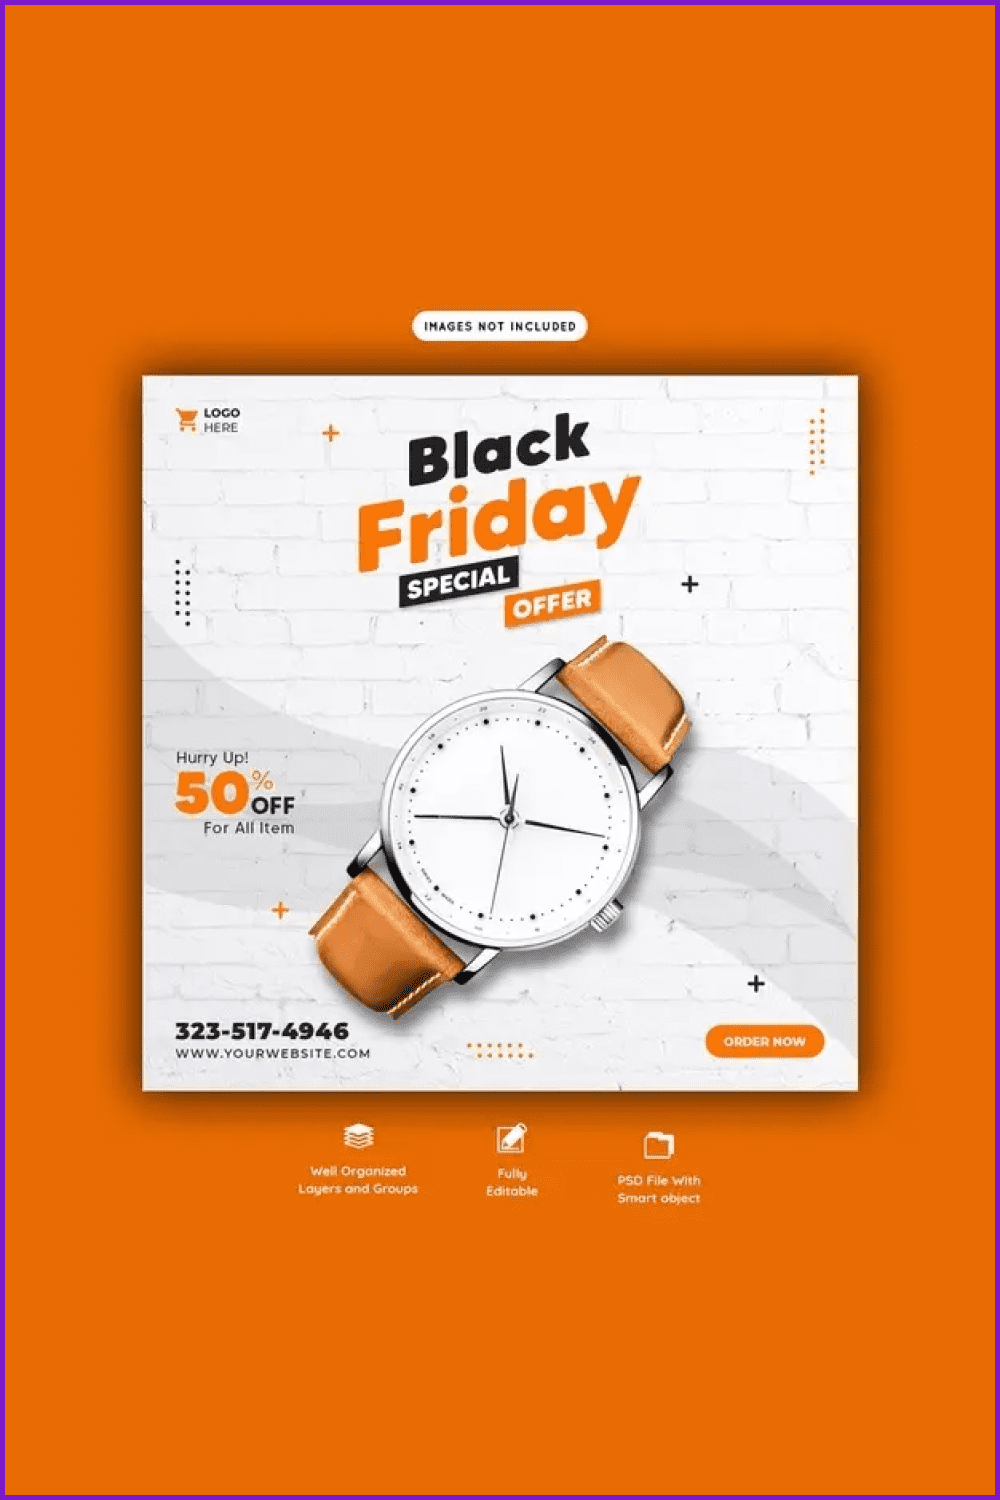 Poster for black friday with classic wrist watch on gray background.